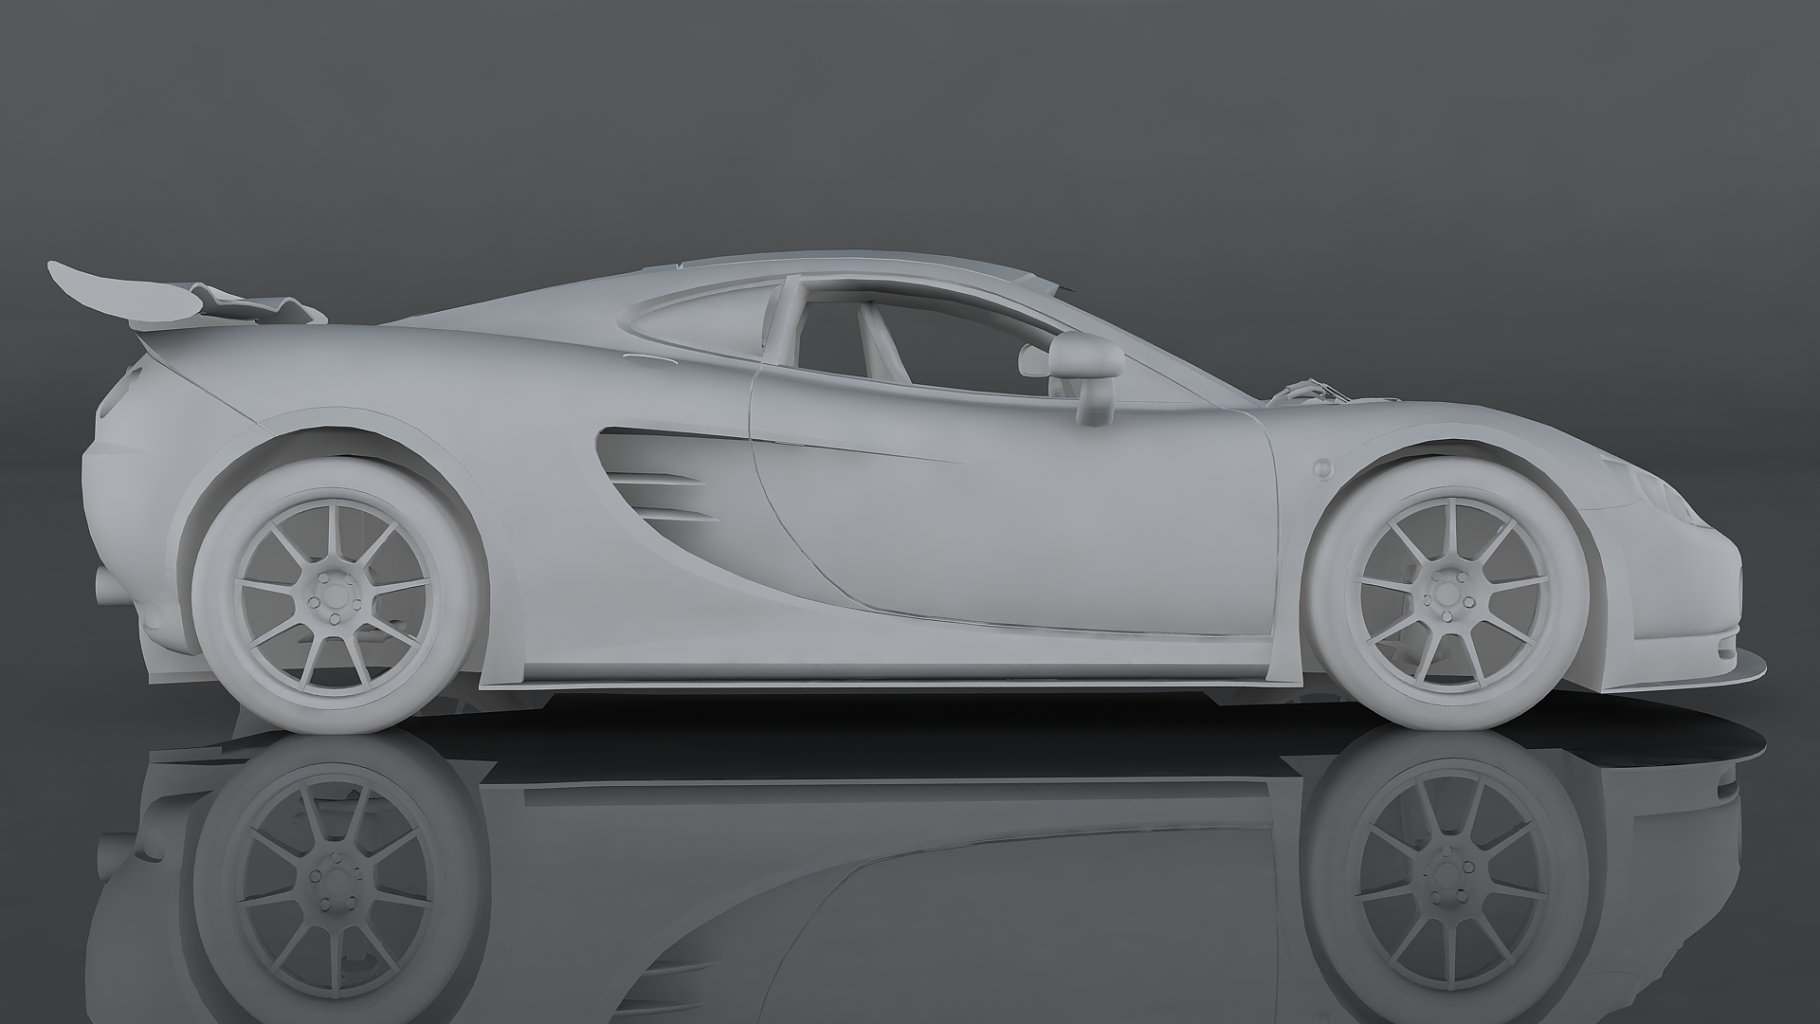 Ascari kz1r low poly 3d model car graphic gray mockup on the right side.